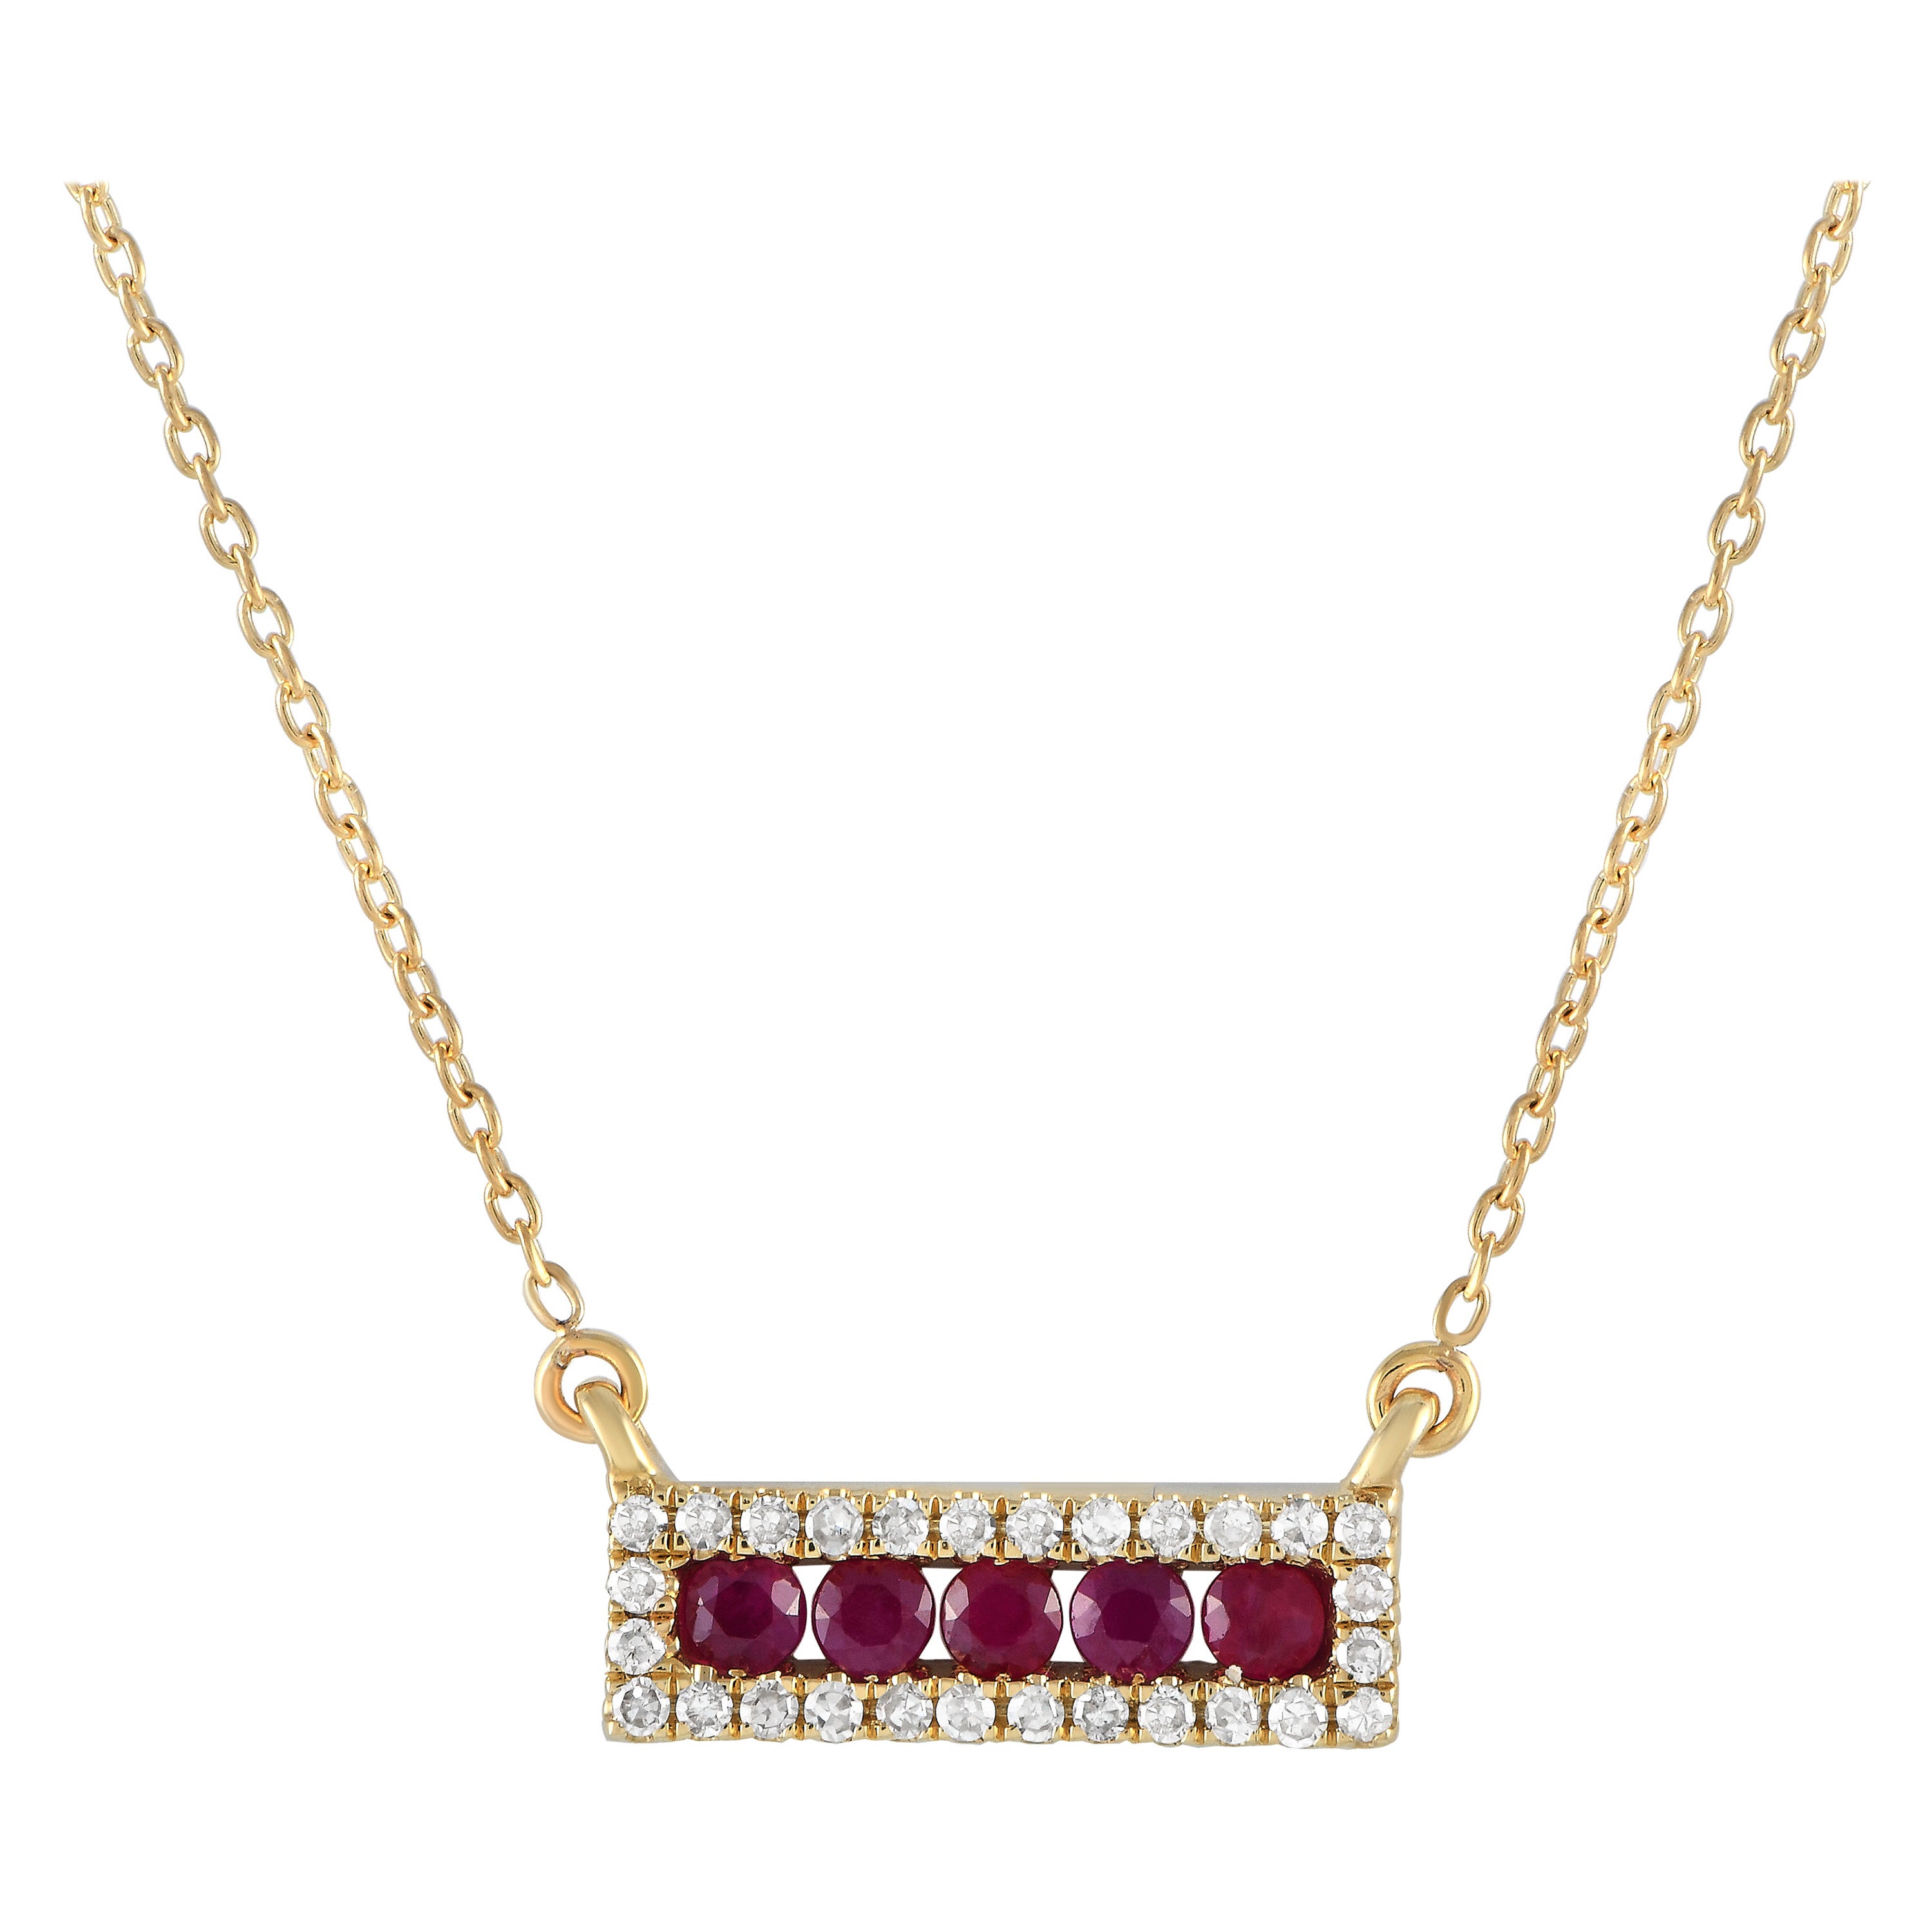 LB Exclusive 14K Yellow Gold 0.15ct Diamond & Ruby Pendant Necklace NK4-14783YRU For Sale